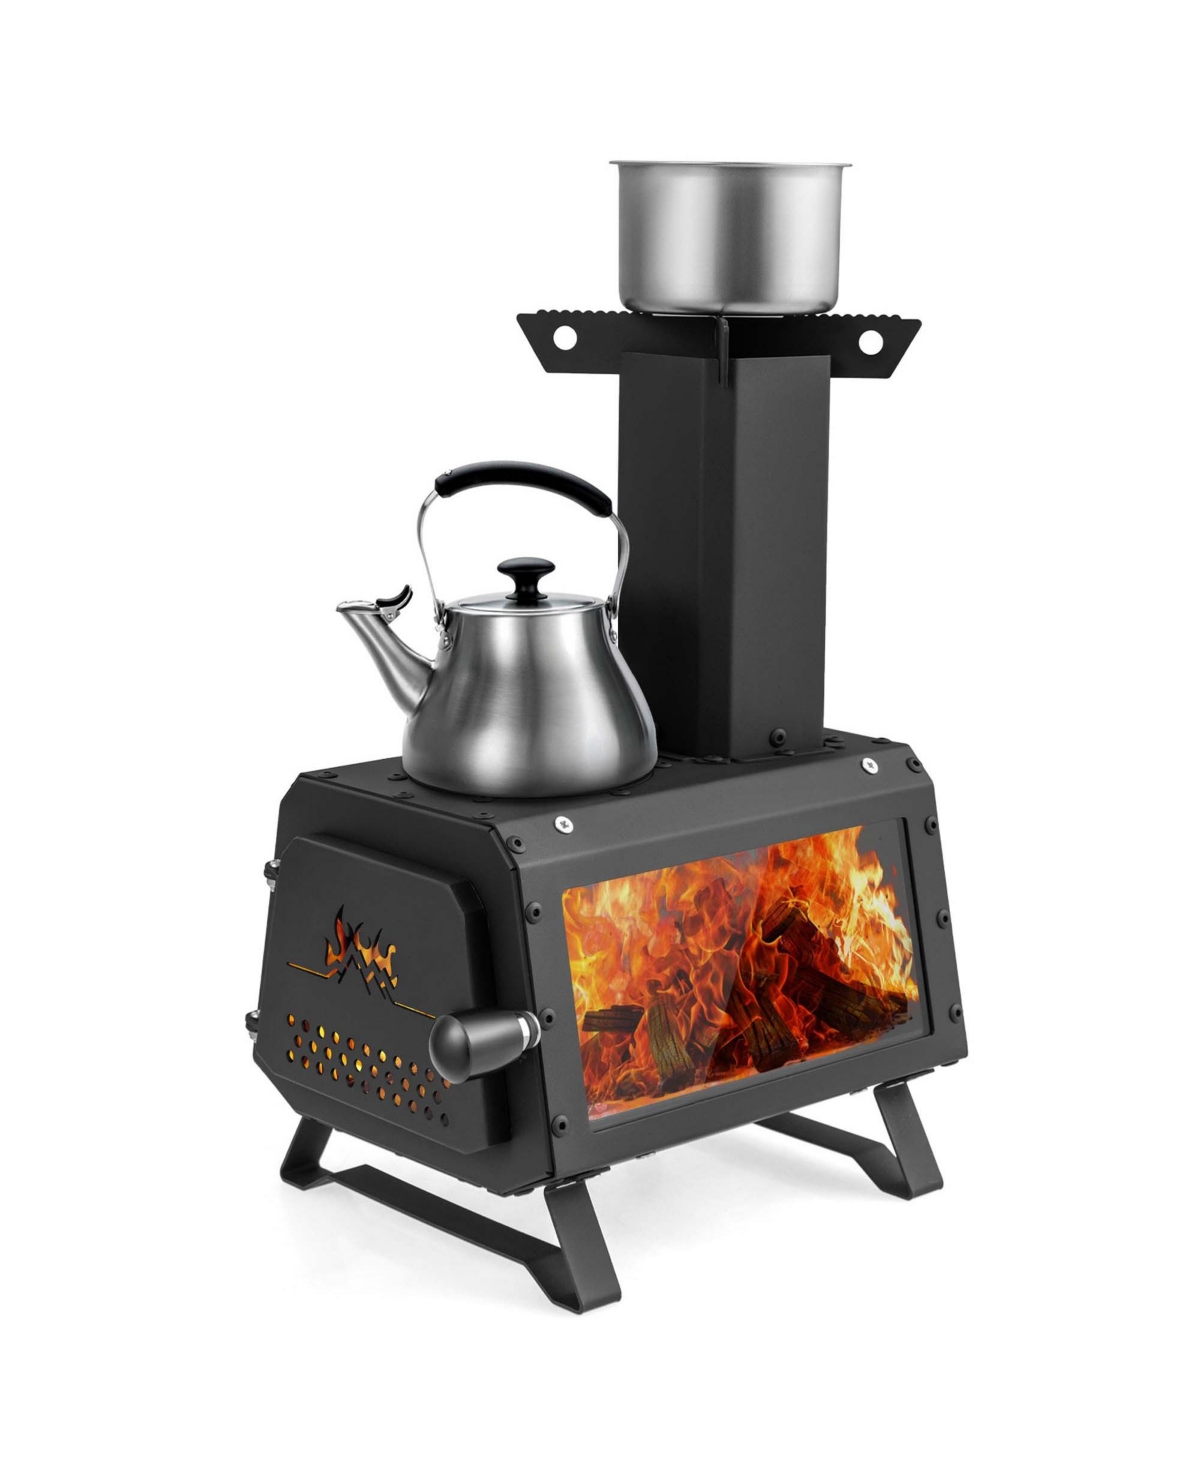 Portable Wood Burning Stove Wood Camping Stove Heater with 2 Cooking Positions - Black